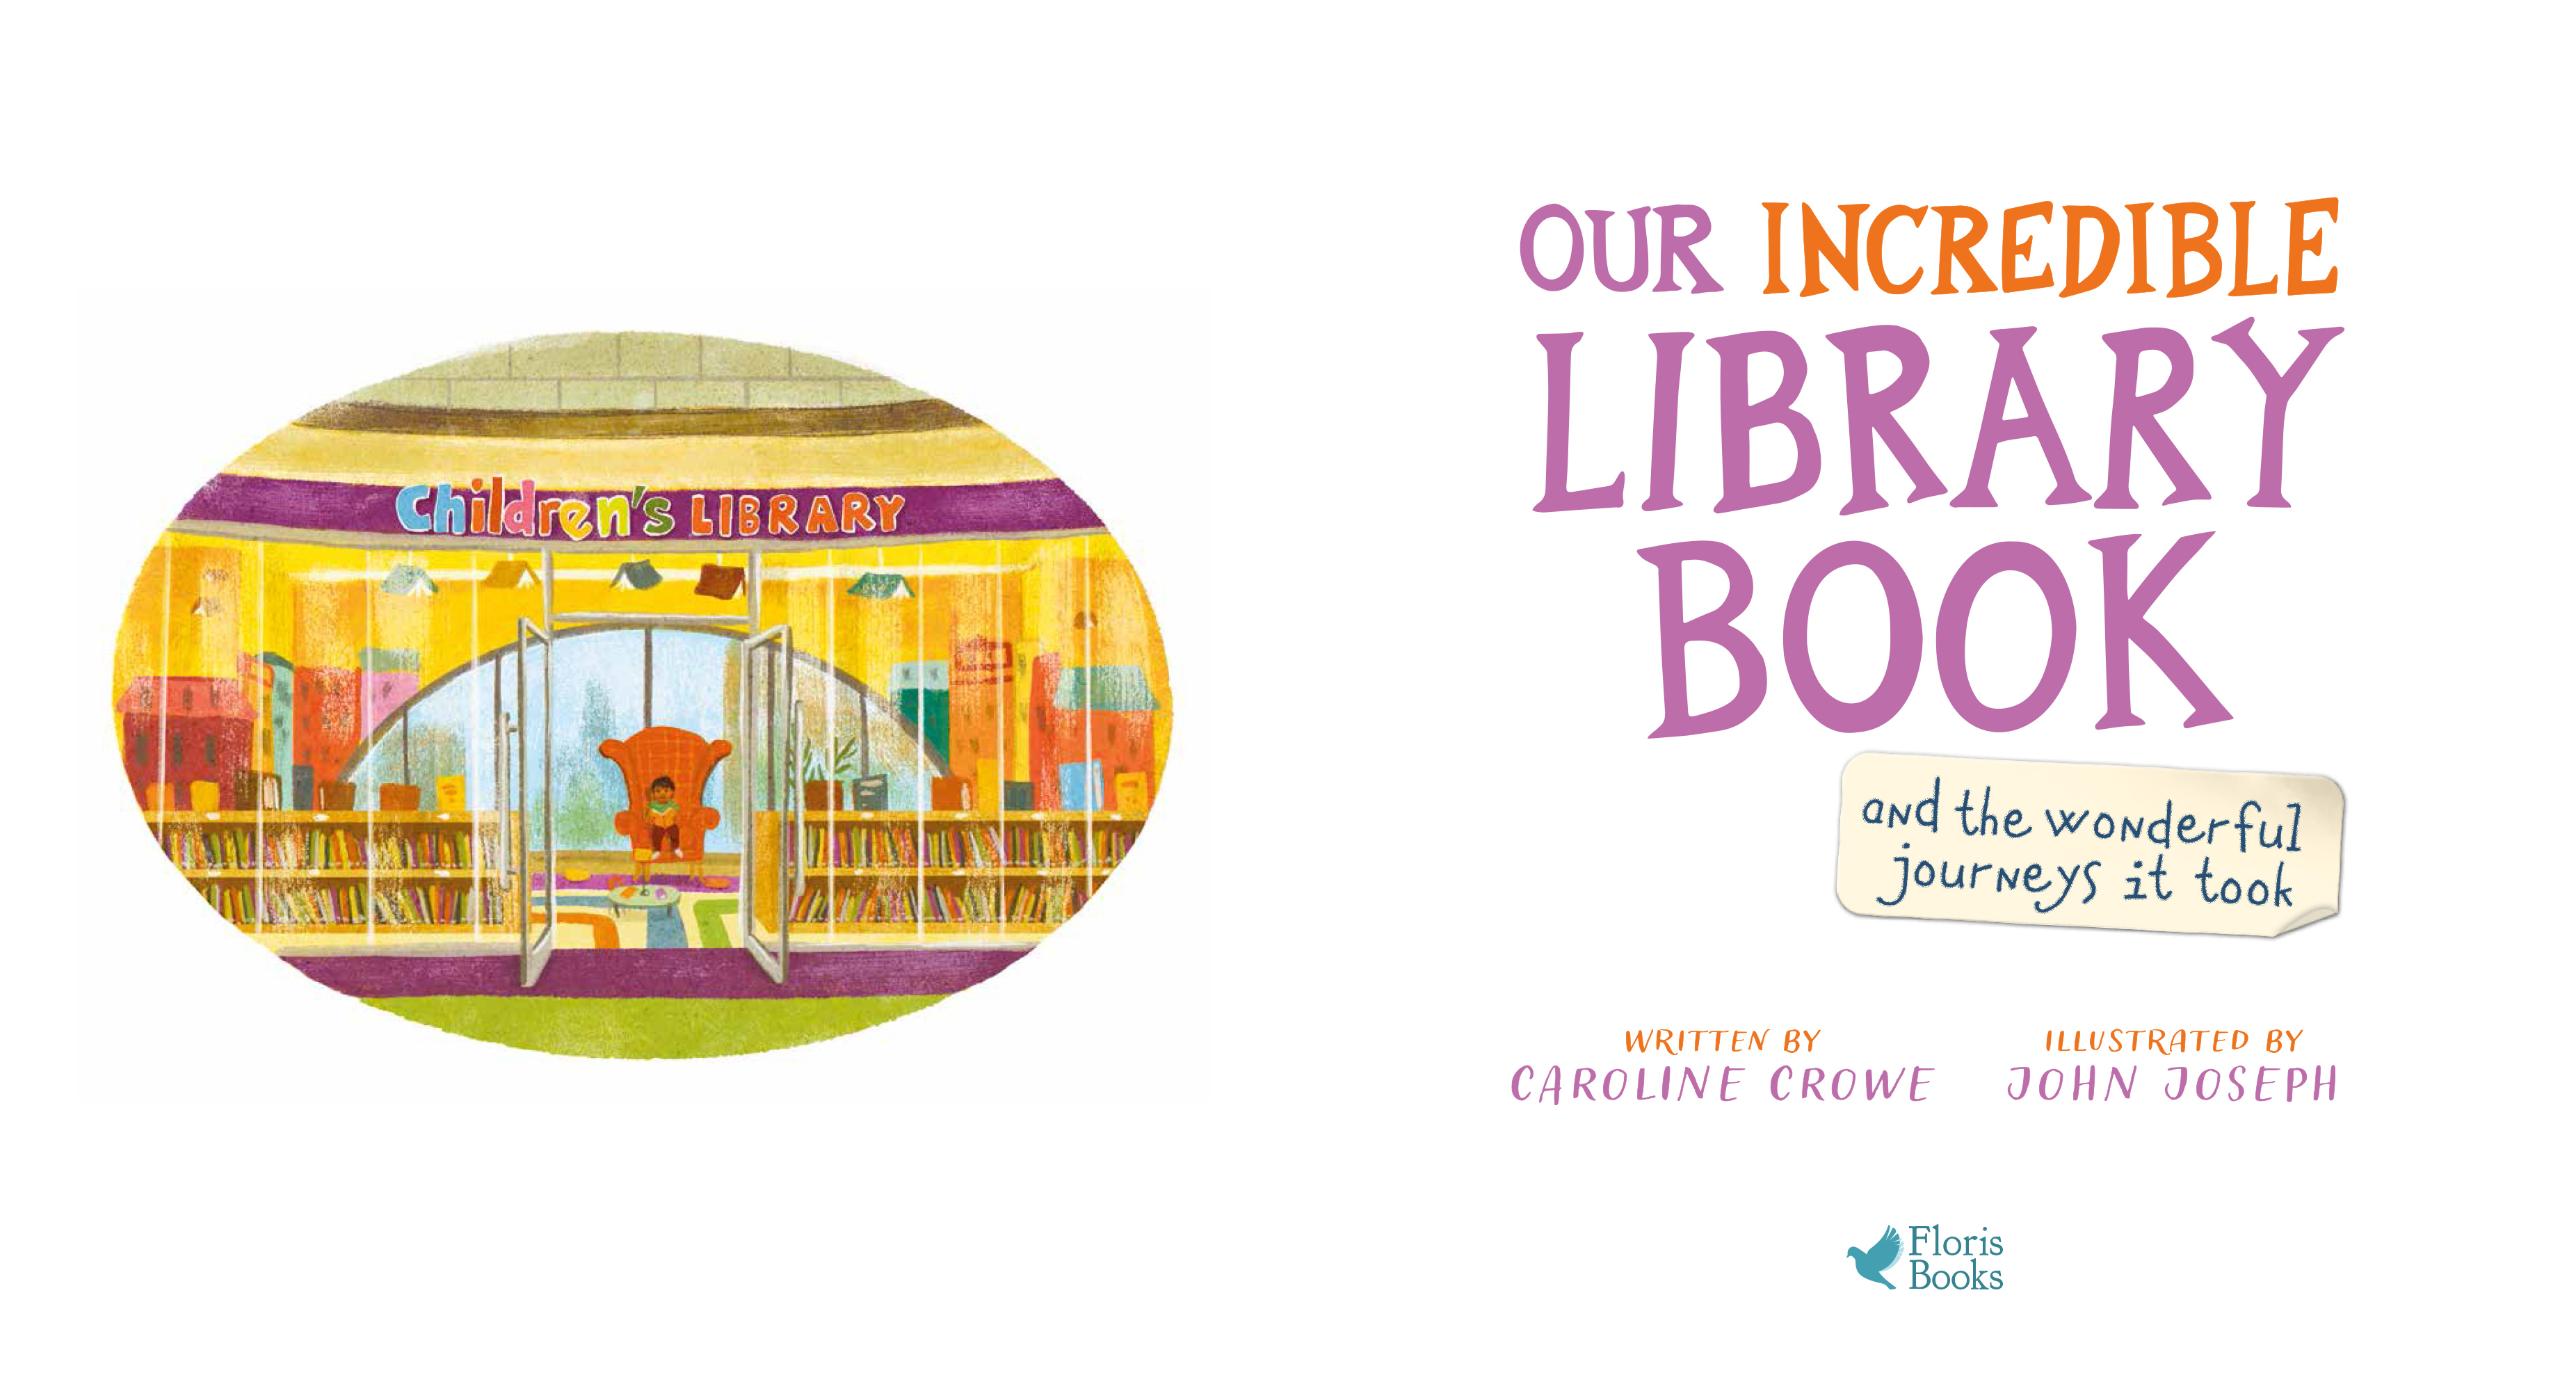 Our Incredible Library Book (and the wonderful journeys it took)